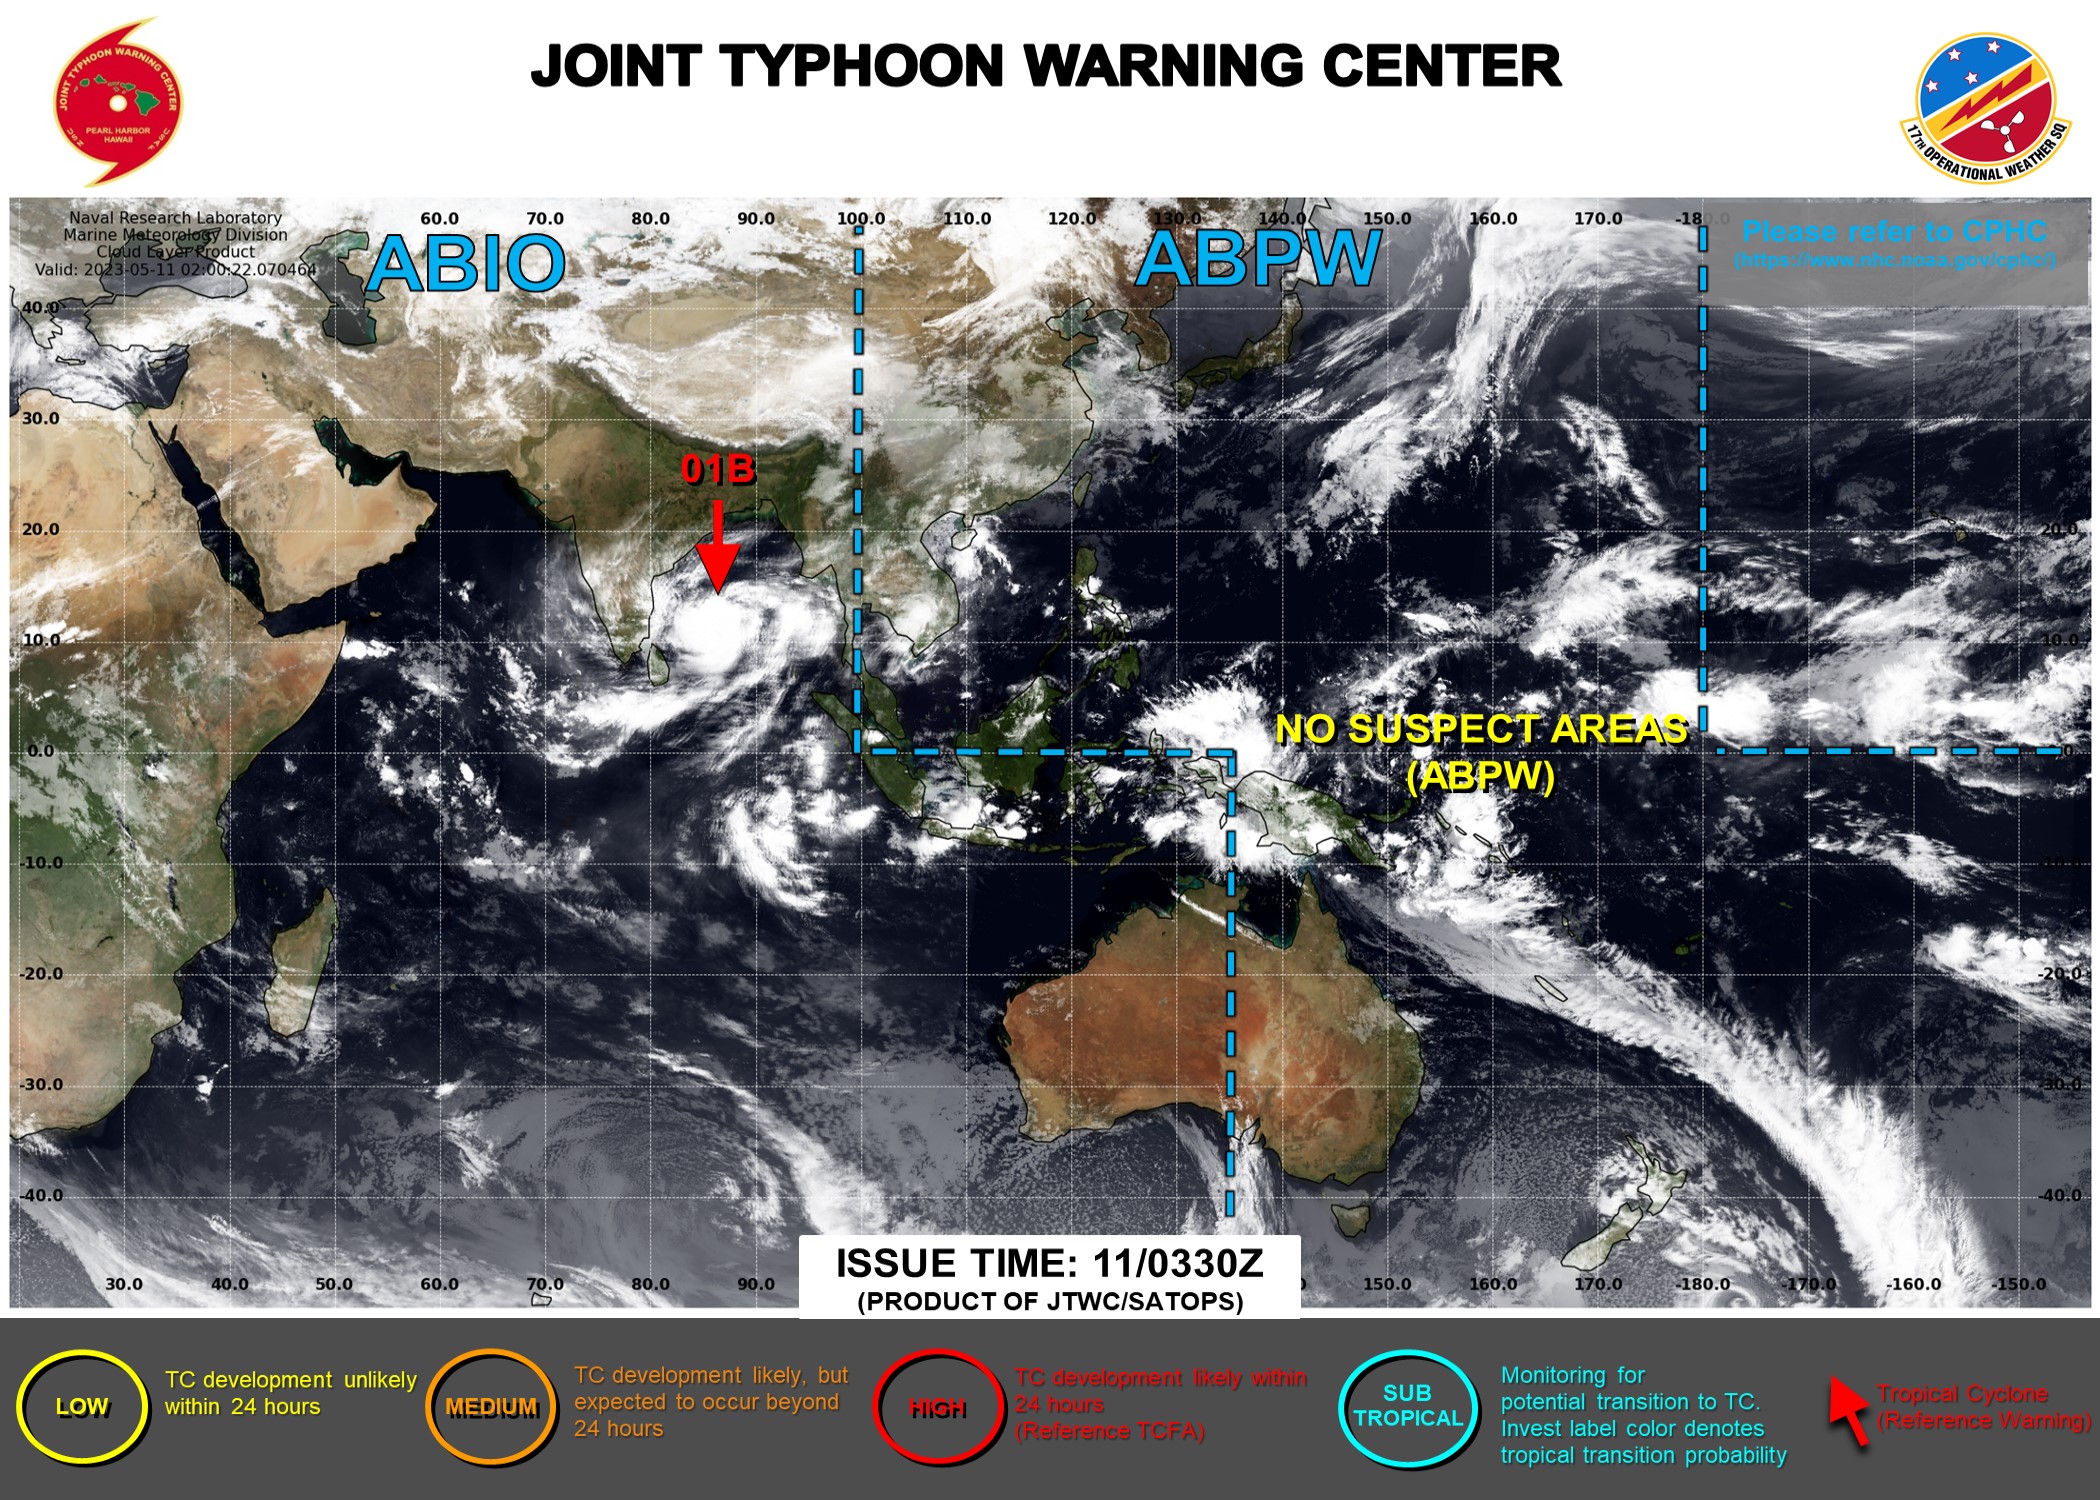 JTWC IS ISSUING 6HOURLY WARNINGS AND 3HOURLY SATELLITE BULLETINS ON TC 01B.